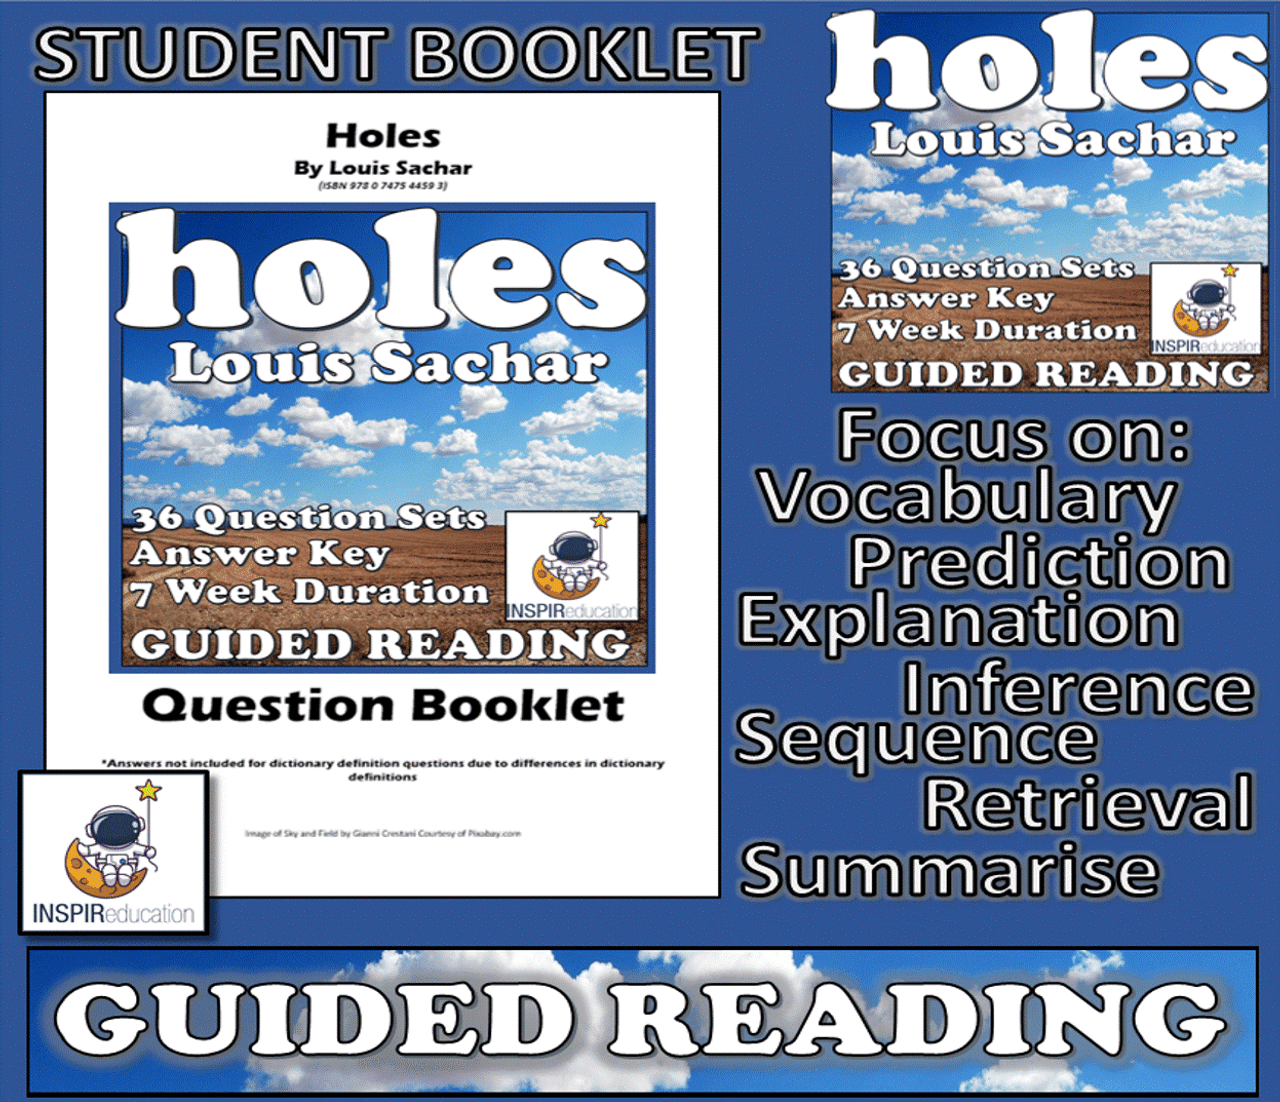 Holes by Louis Sachar - Detailed Reading Questions with Answers